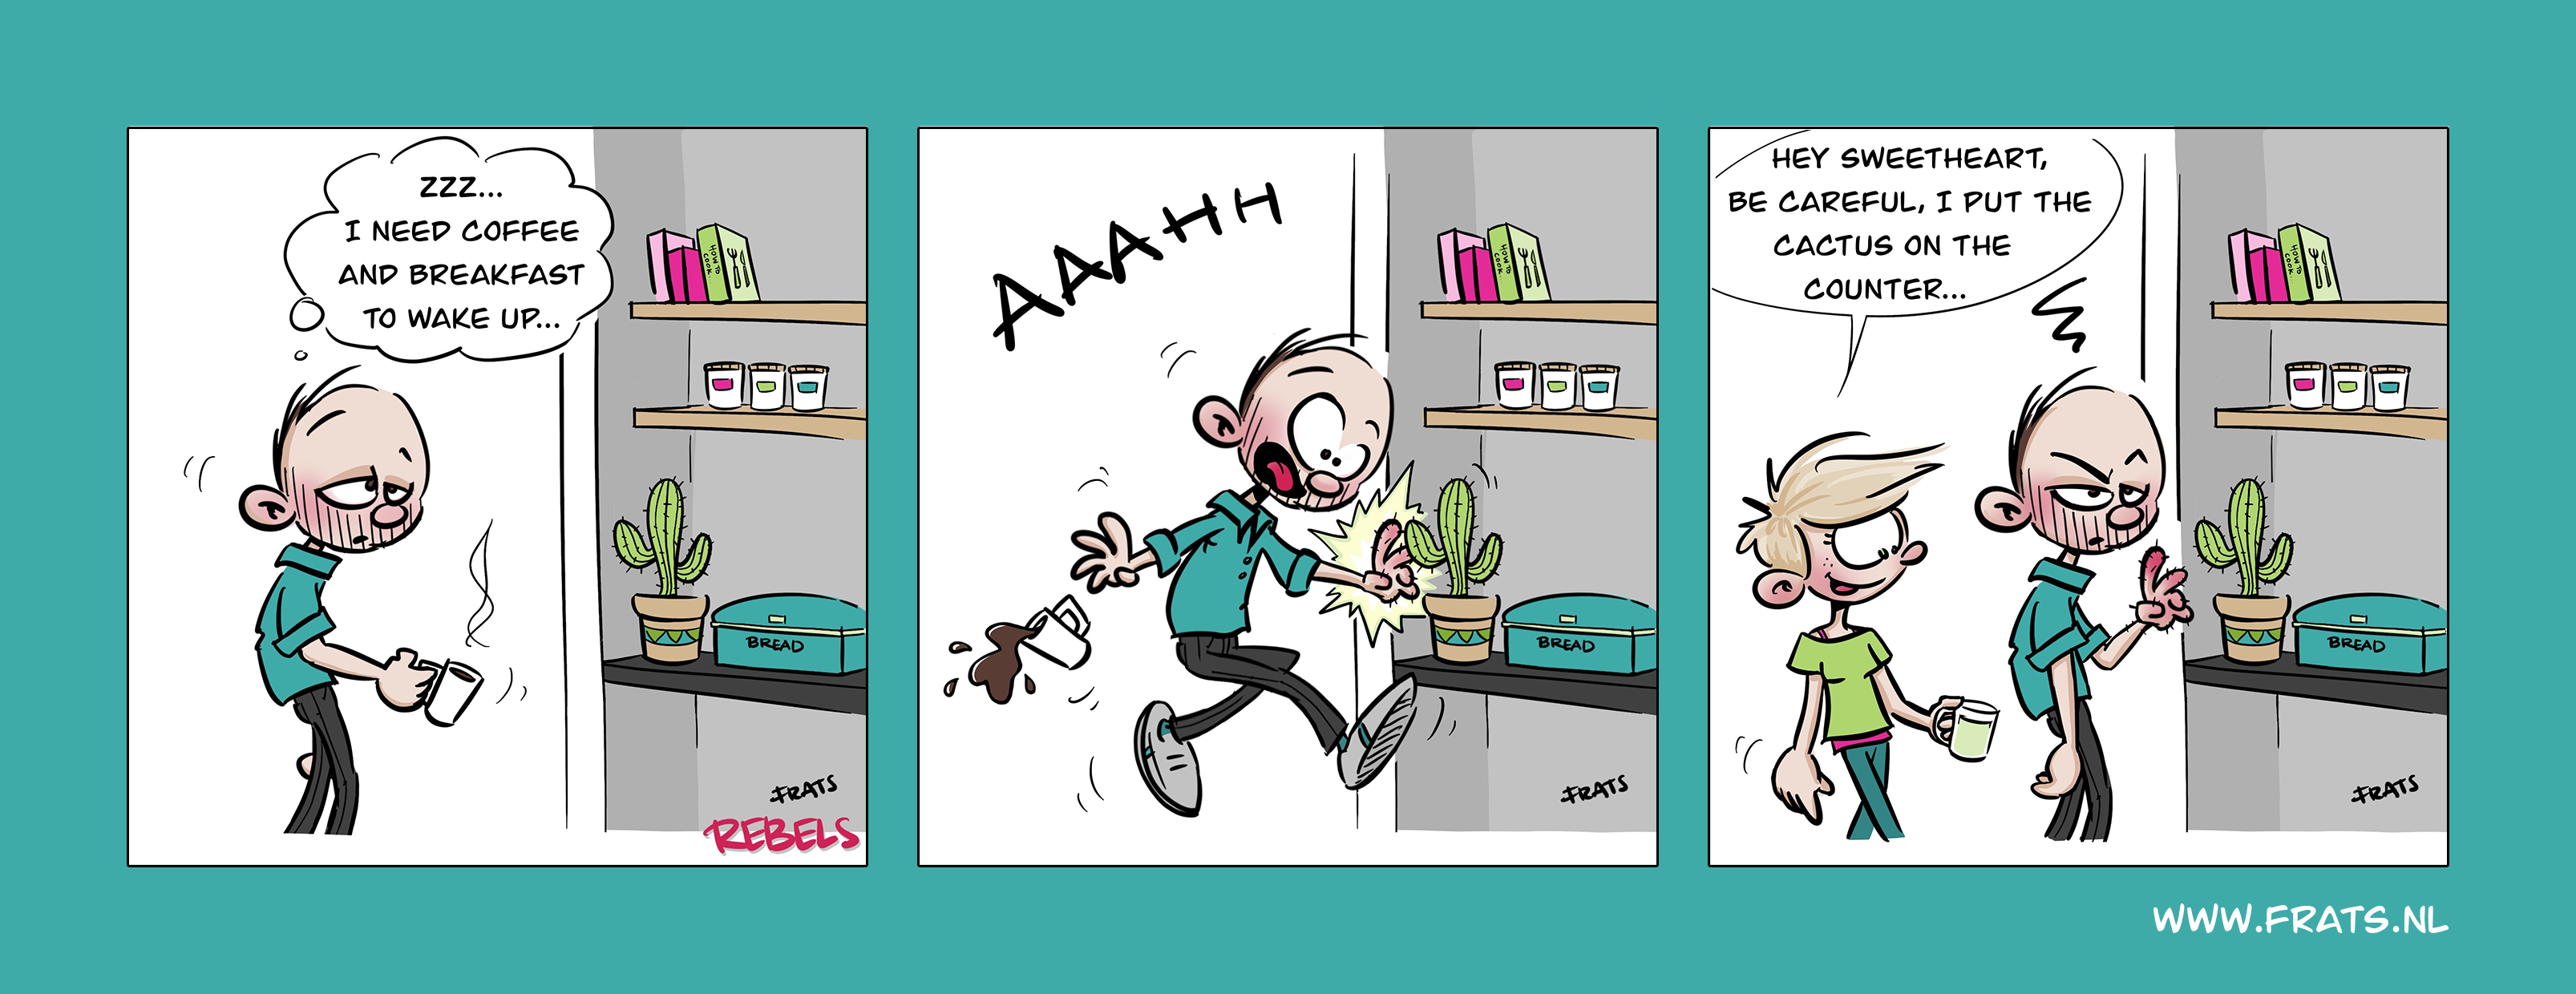 Rebels comic strip about a cactus